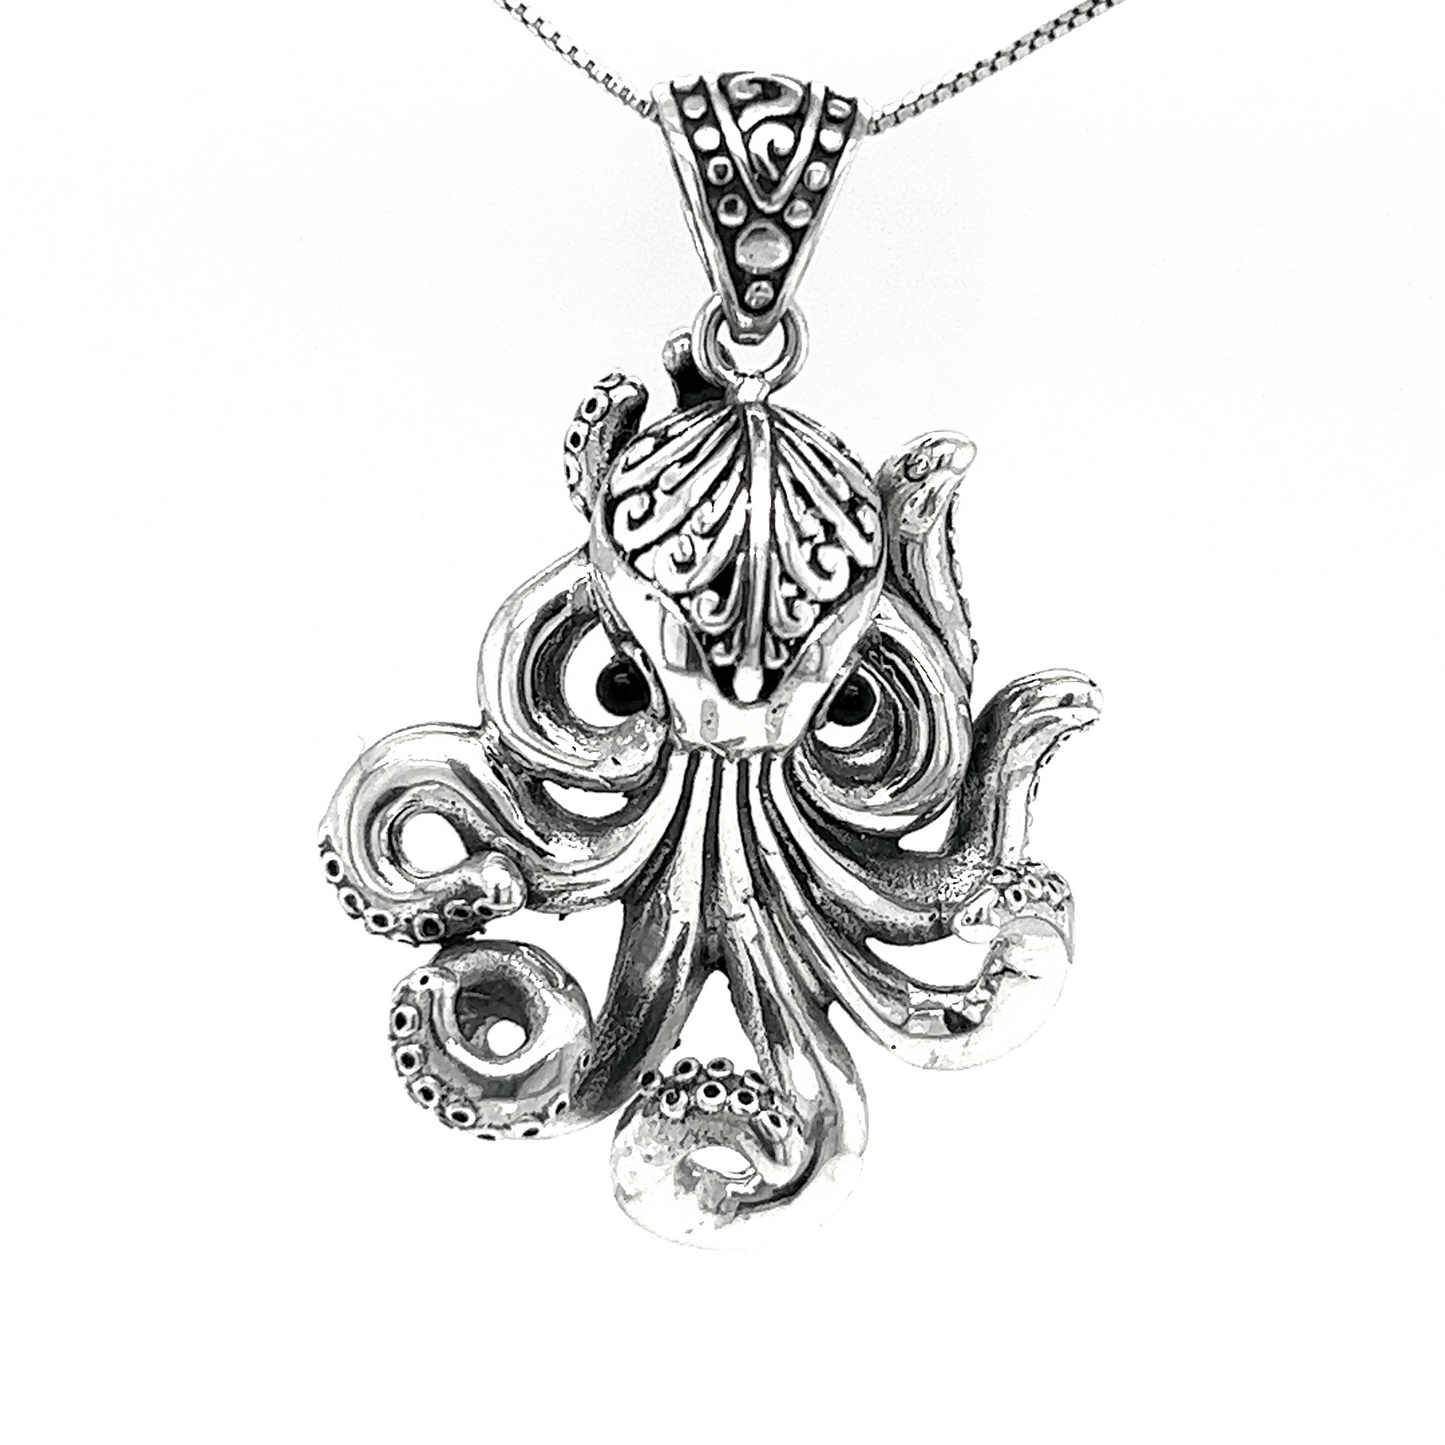 A captivating Exquisite Octopus Pendant on a Super Silver chain.